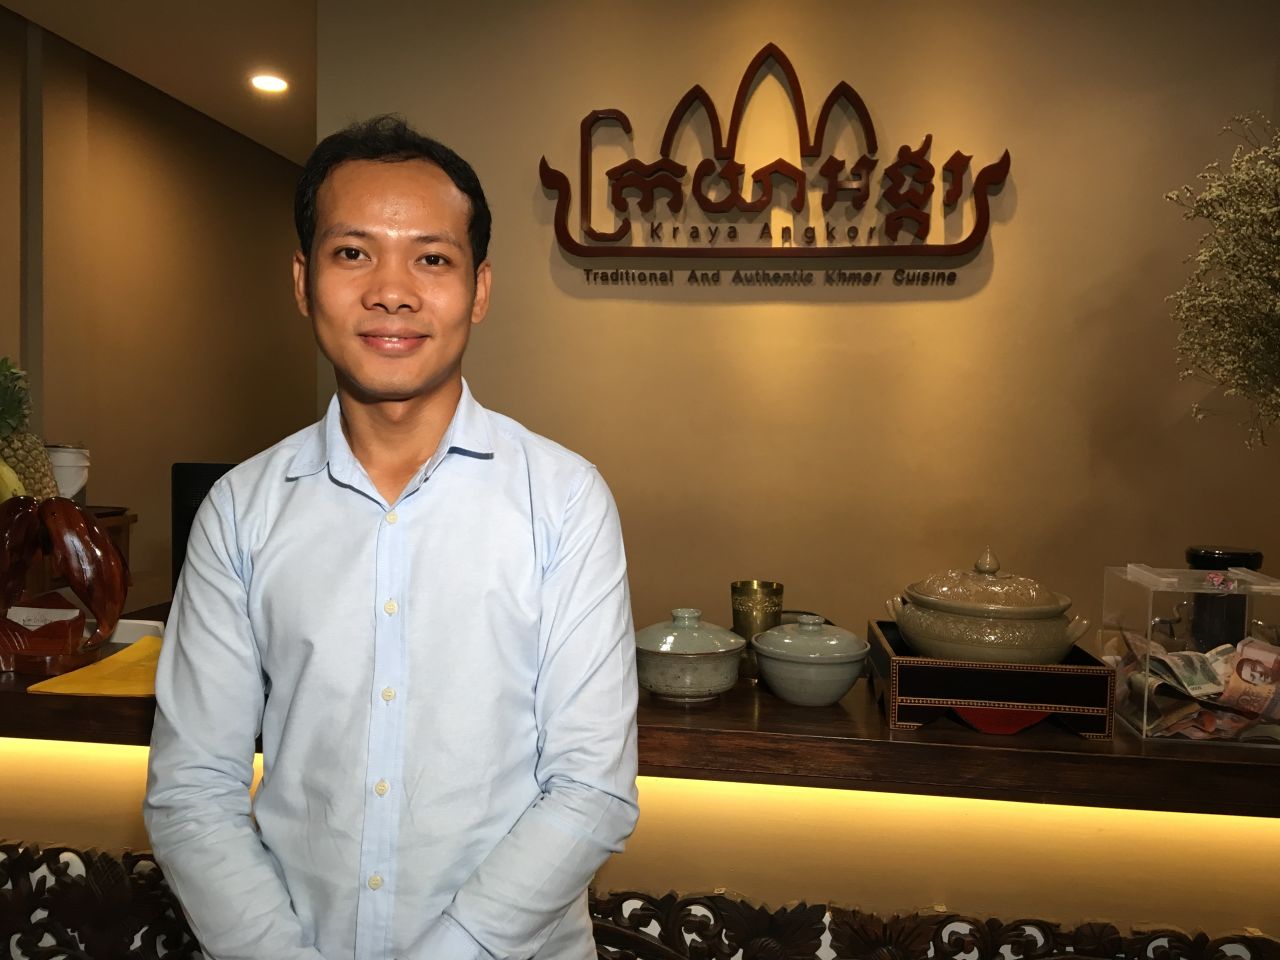 Ly San, a 29-year-old Cambodian lawyer who was born in Siem Reap, started researching Khmer cuisine while studying in France. He traveled the country learning about lost recipes from elderly Cambodians.